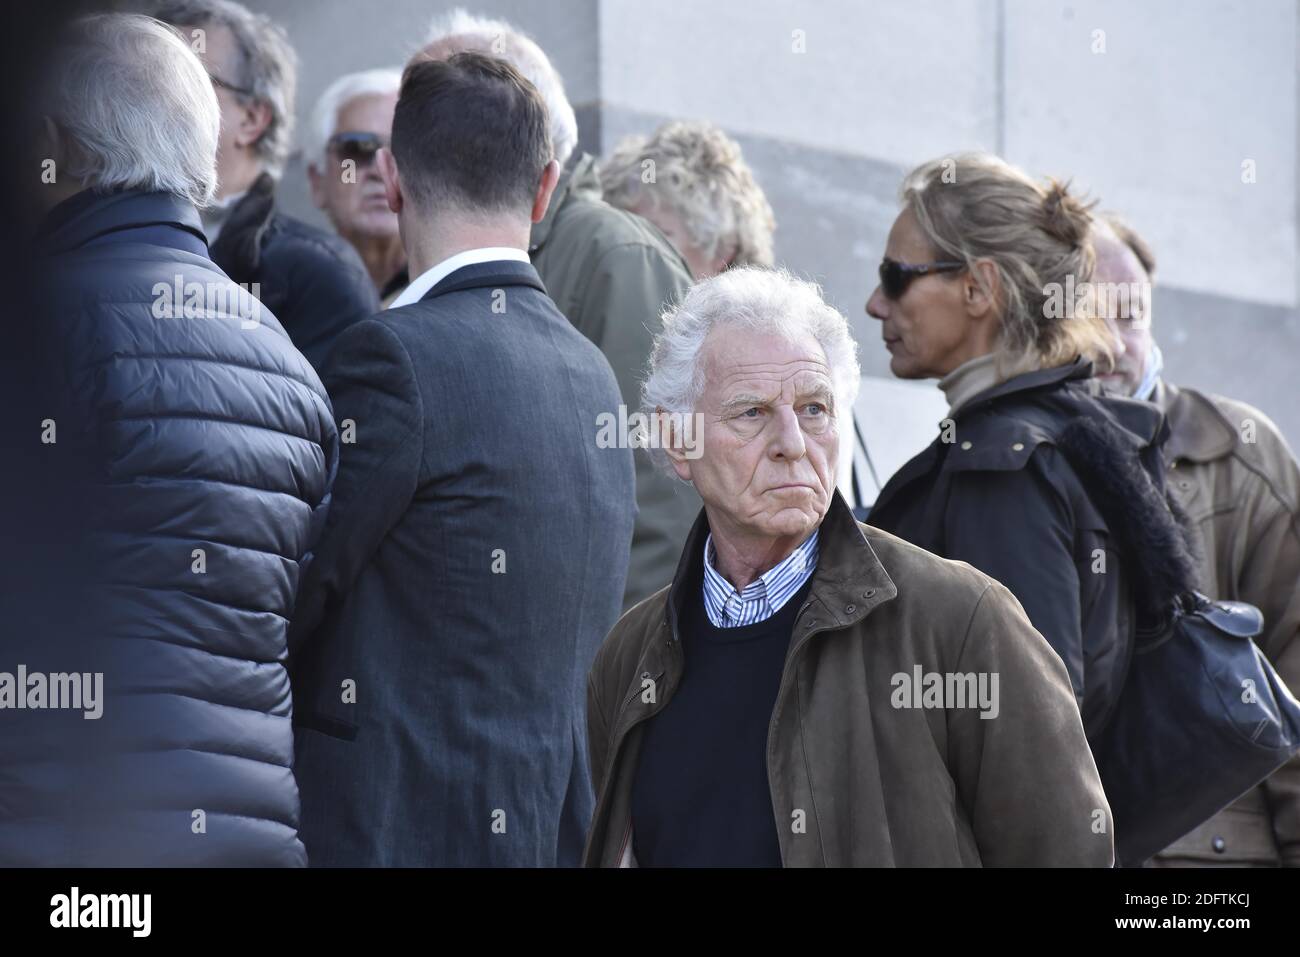 Robert Namias during the funeral of French Journalist Philippe Gildas at the Pere Lachaise Cemetery in Paris, France on November 5, 2018. Photo by Patrice Pierrot/Avenir Pictures/ABACAPRESS.COM Stock Photo